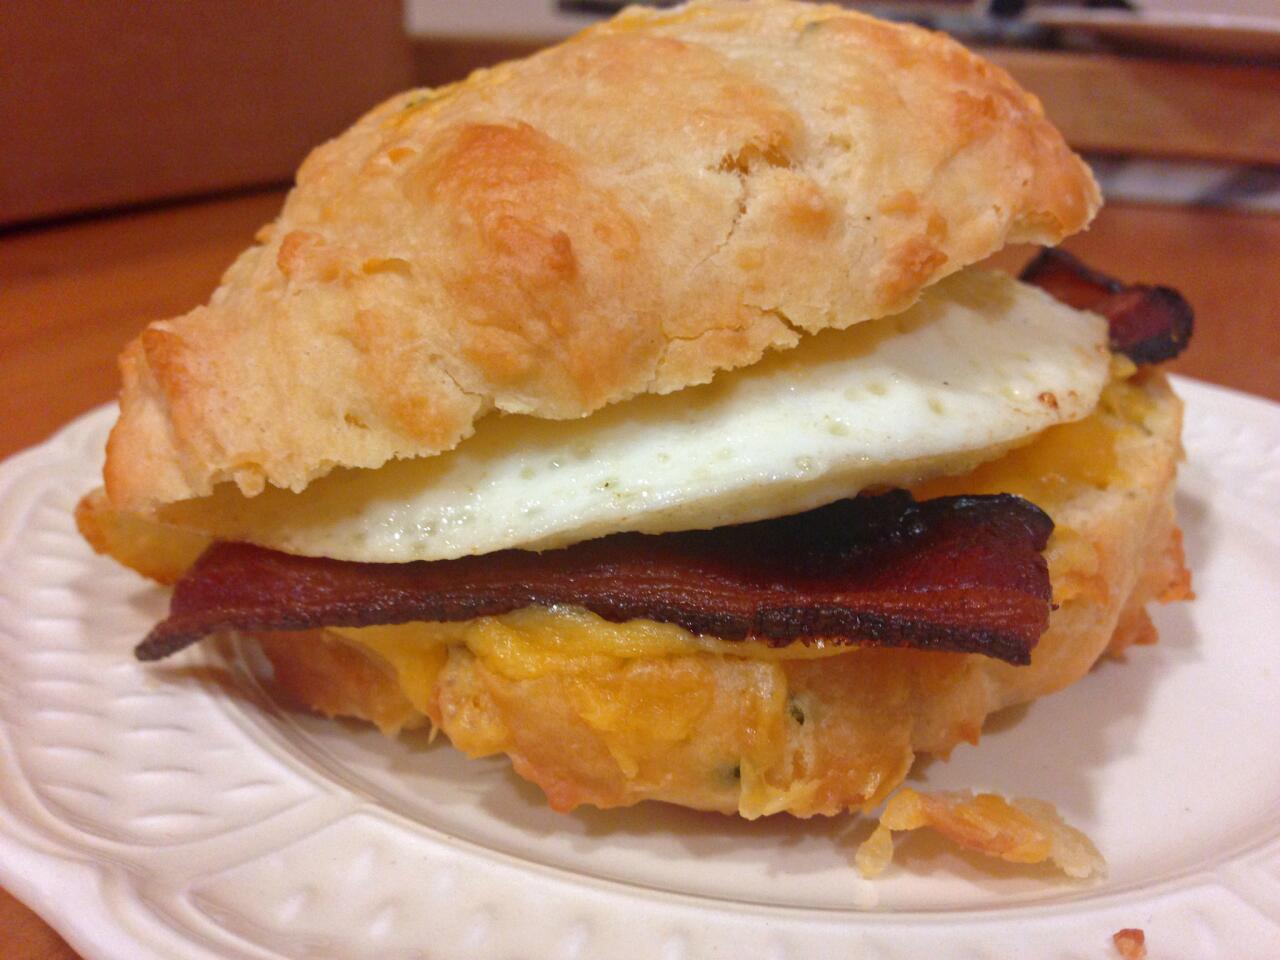 The "McFong" breakfast sandwich from Semi Sweet bakery in downtown comes on a cheddar and chive biscuit with bacon, cheese and a medium fried egg.